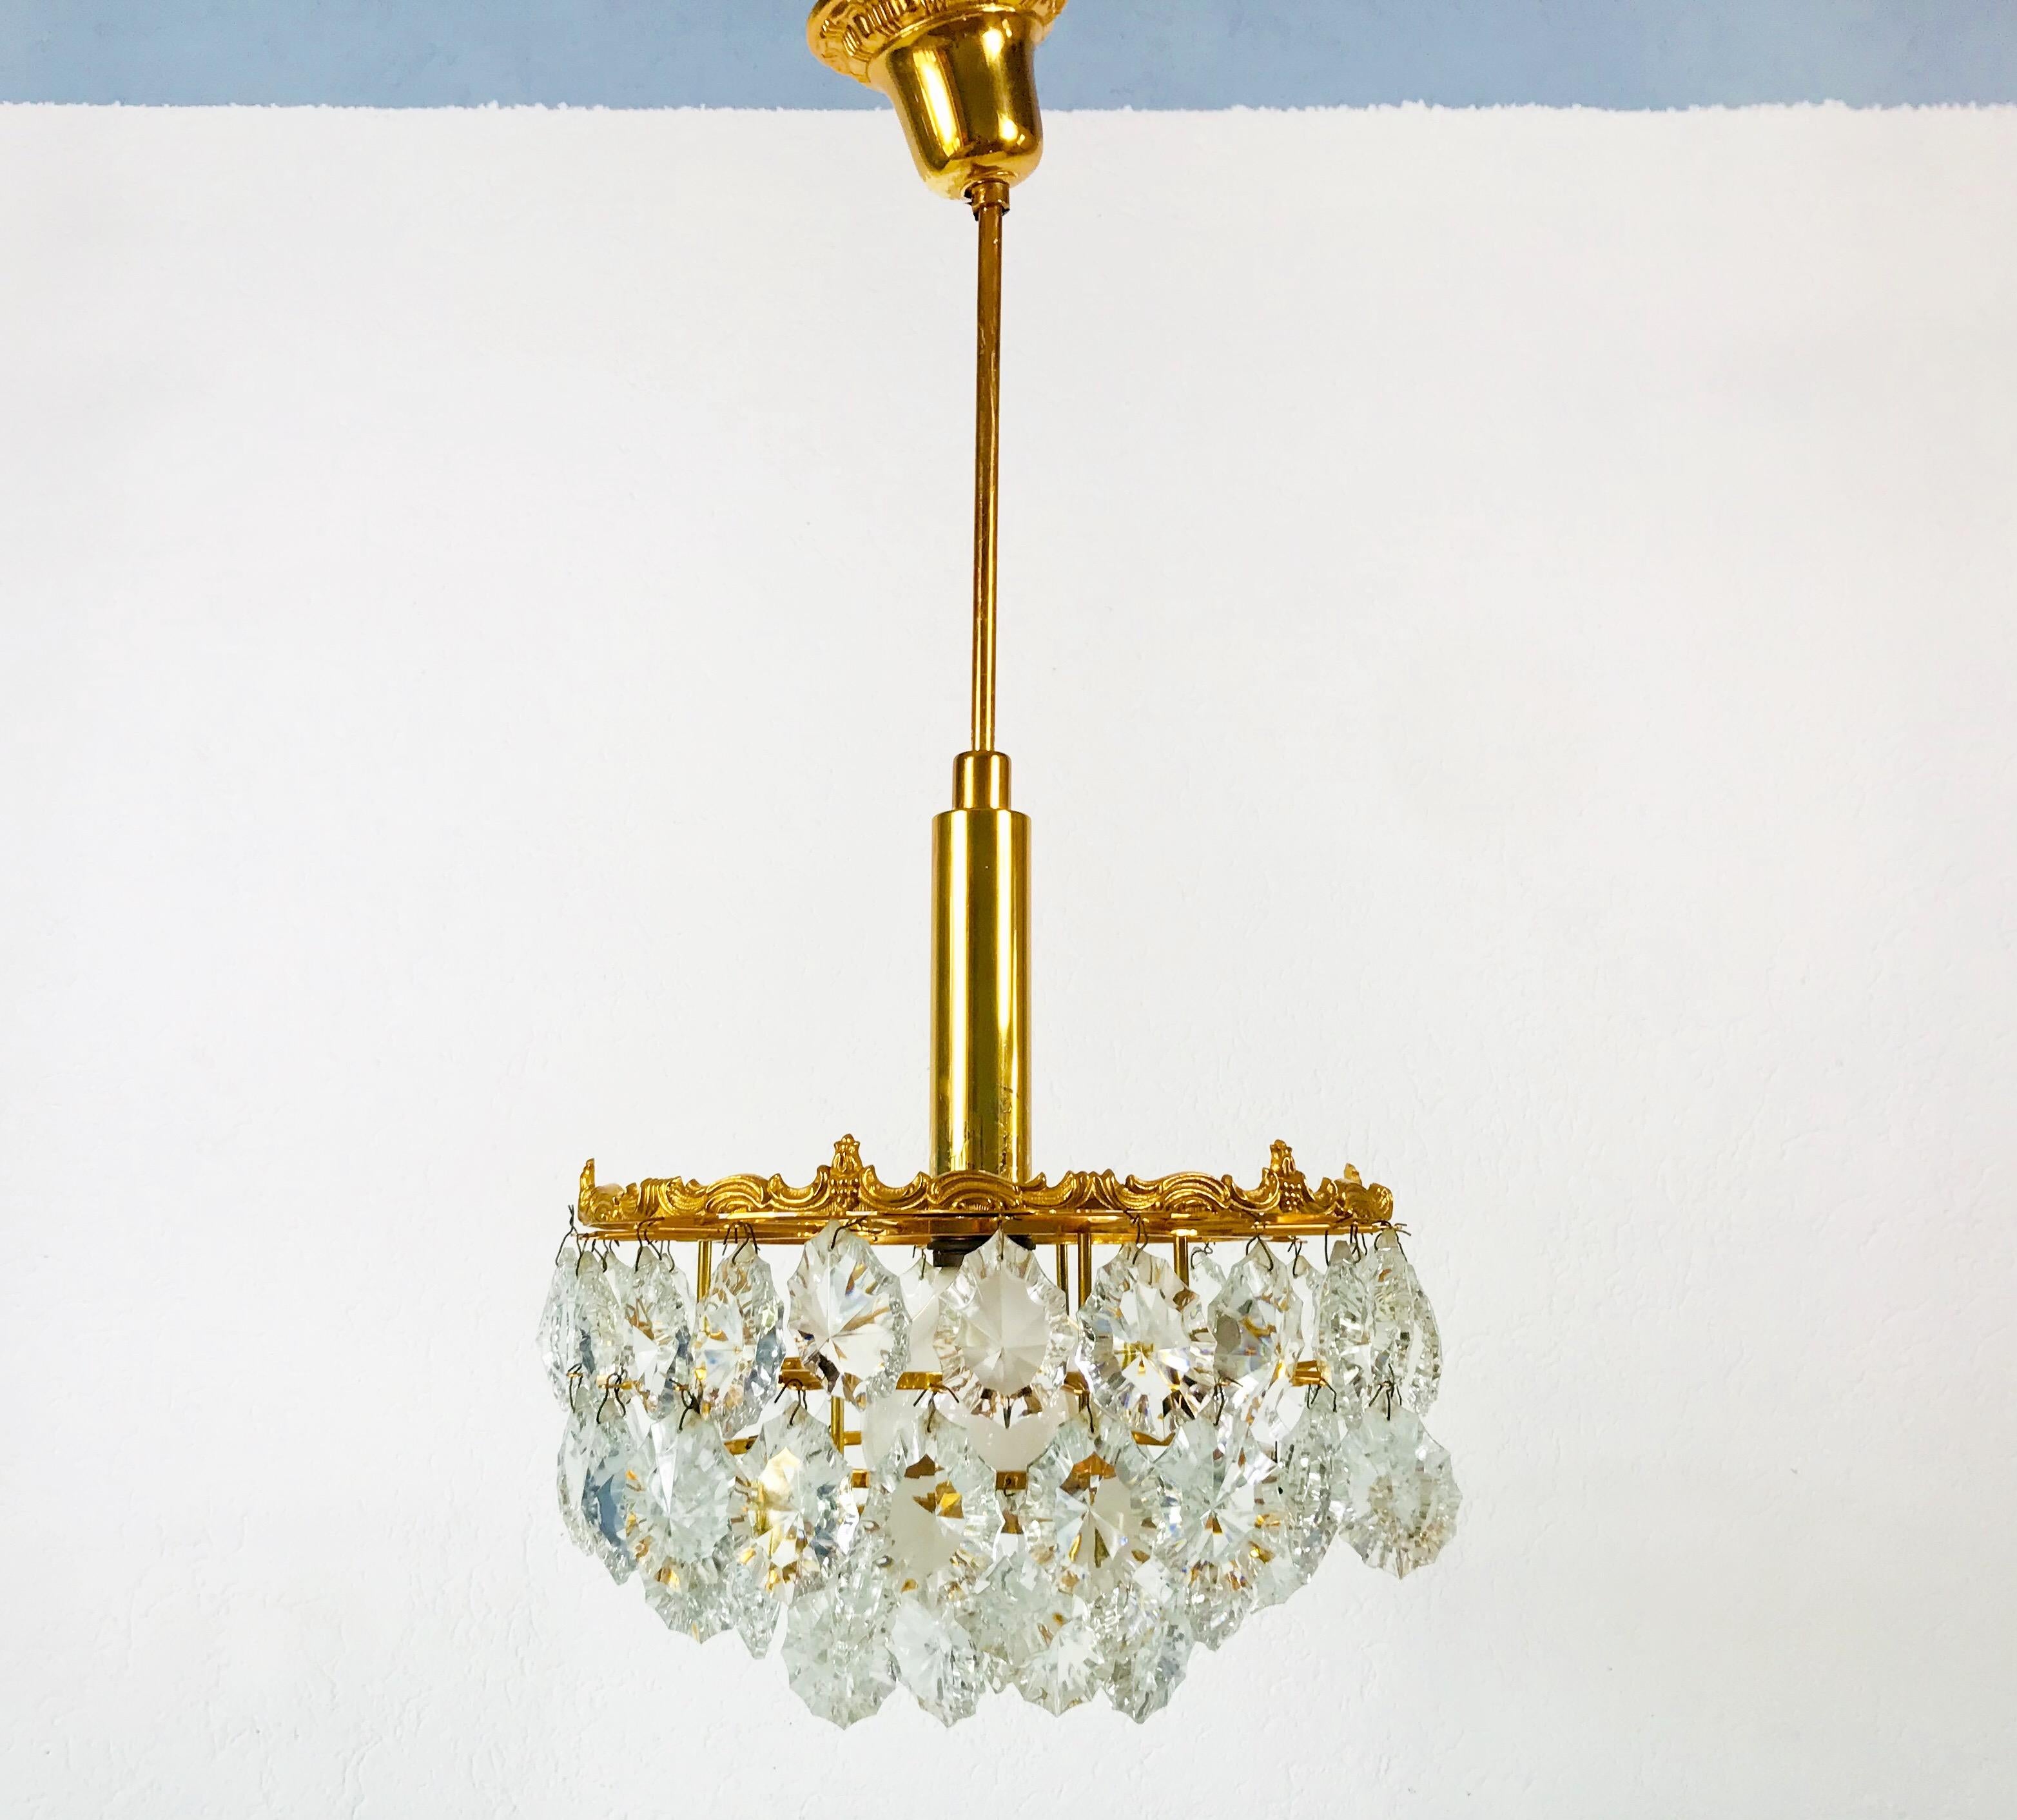 Gilt Brass and Crystal Glass 4-Tier Chandelier by Palwa, Germany, 1970s For Sale 10